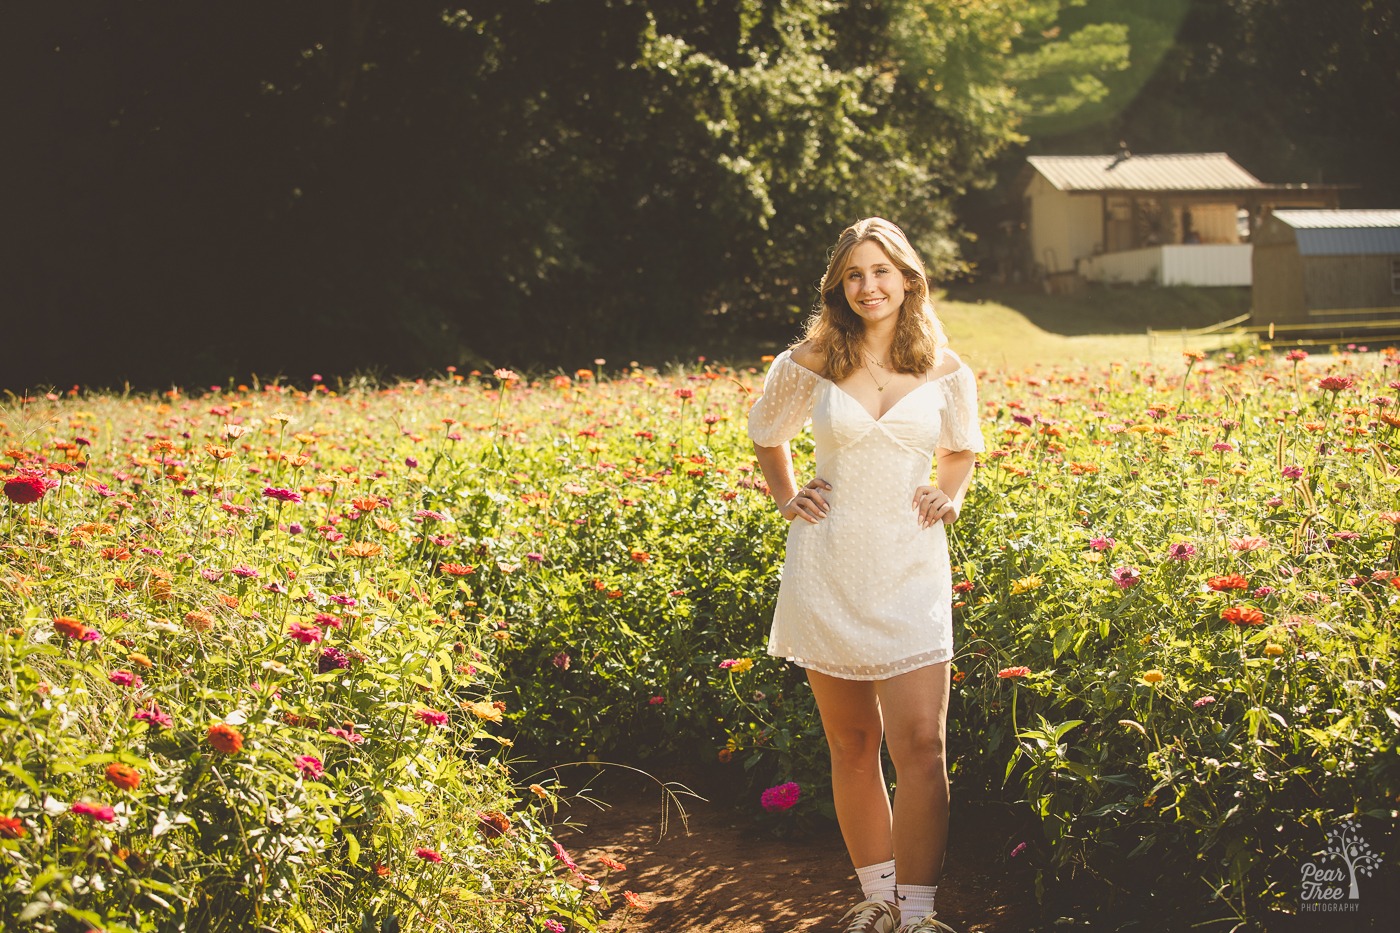 High school senior girl in a white dress and sneakers smiling in a flower field